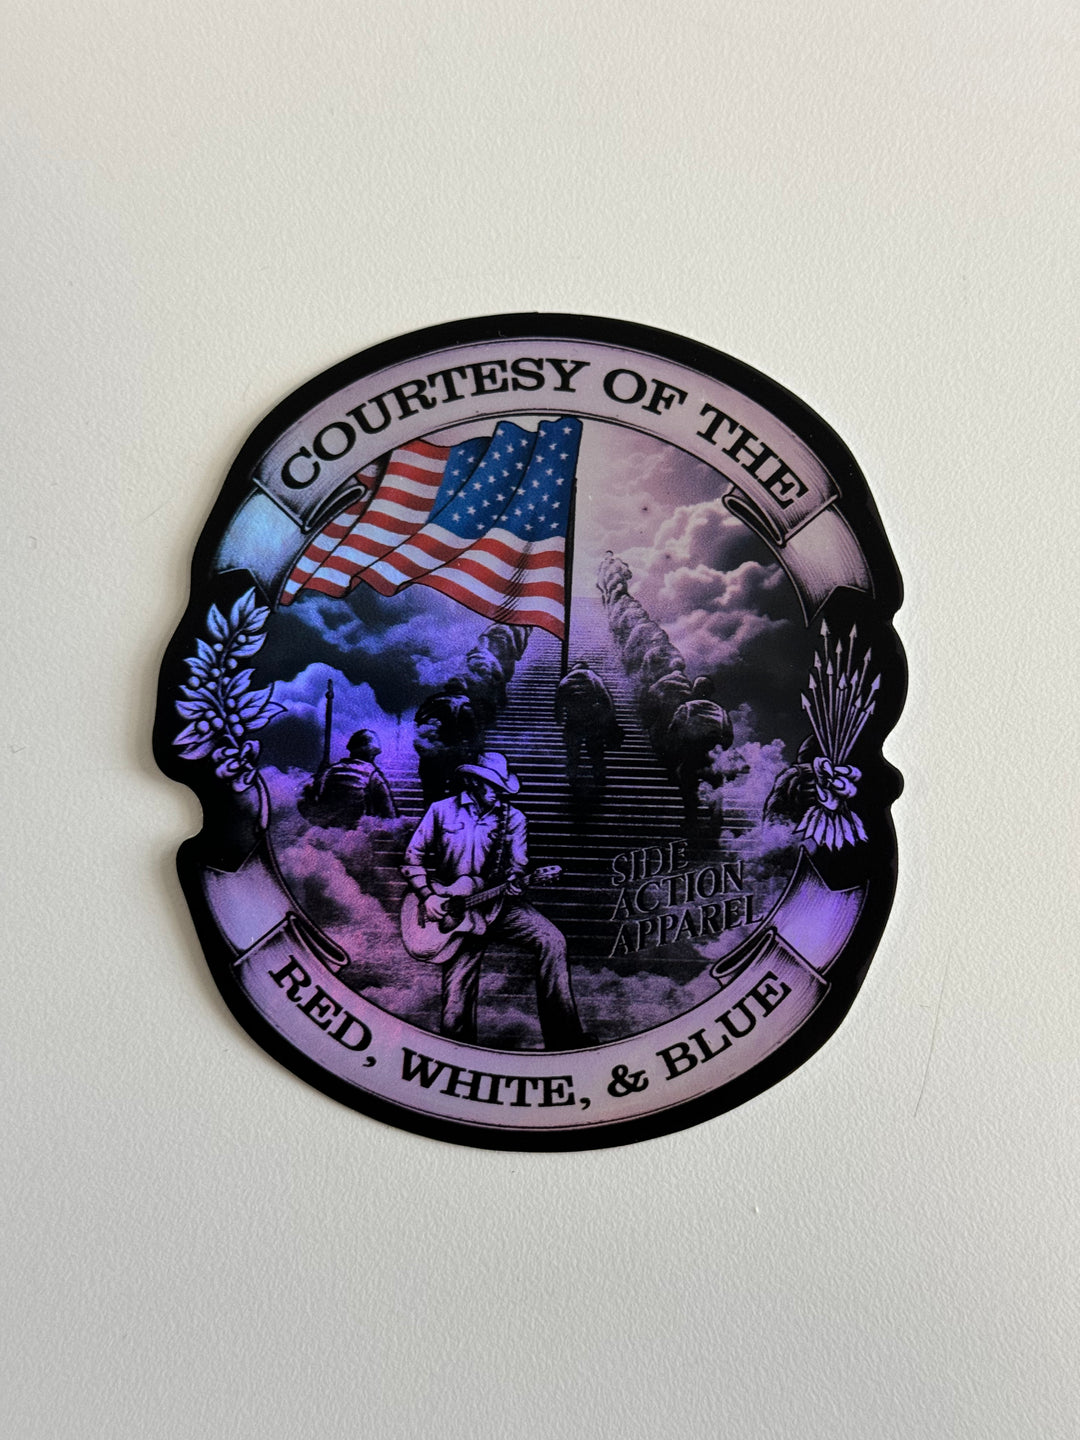 Courtesy of the Red, White and Blue - Hologram Sticker